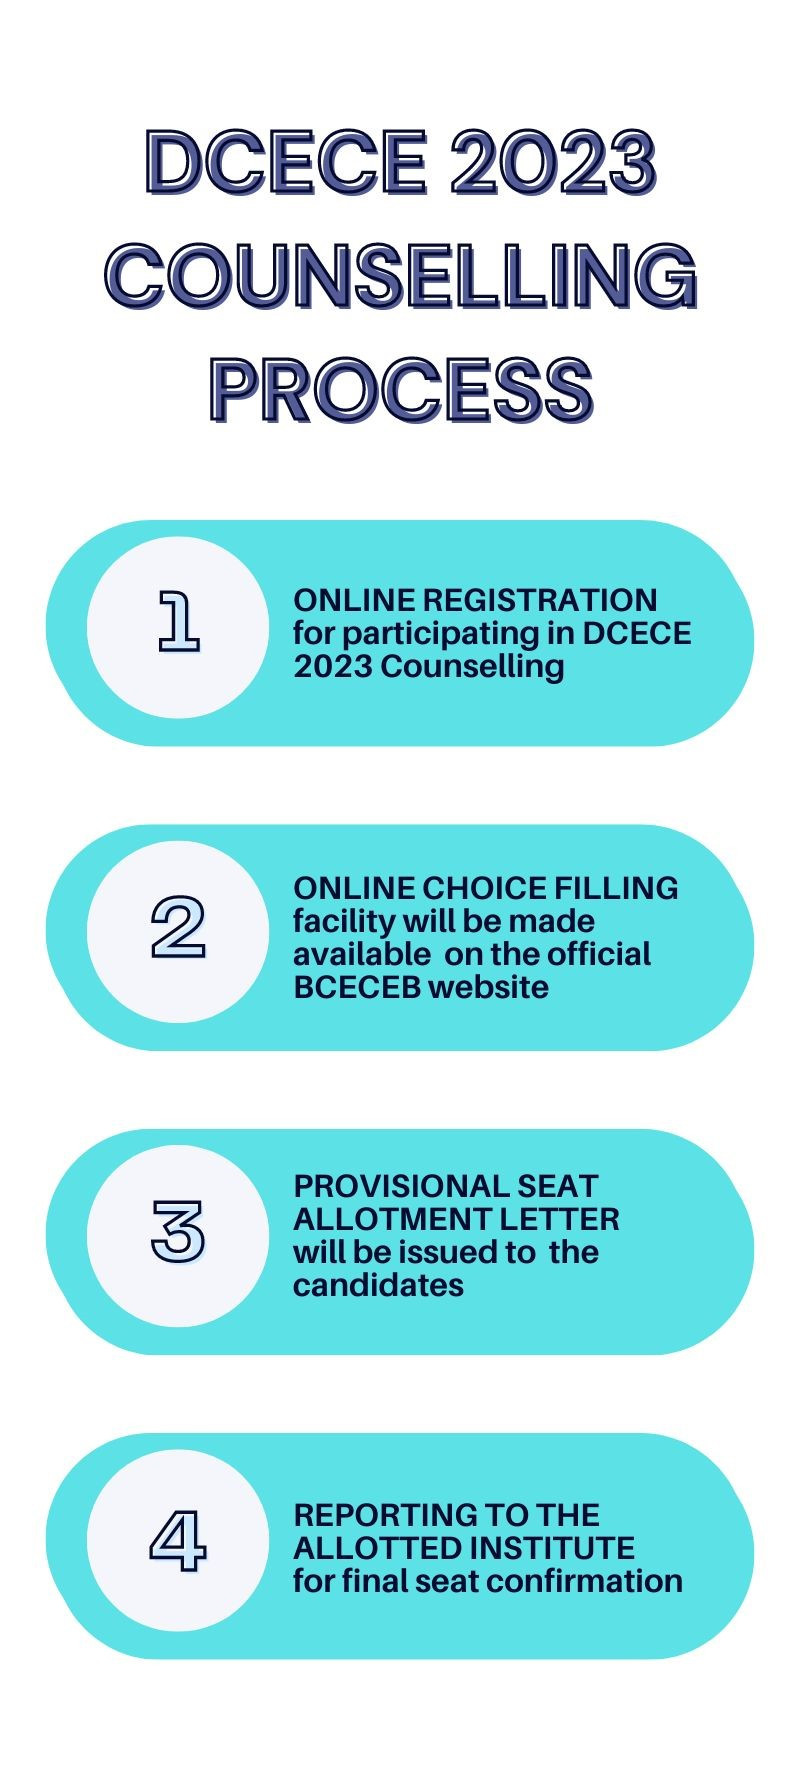 DCECE 2023 Counselling Process